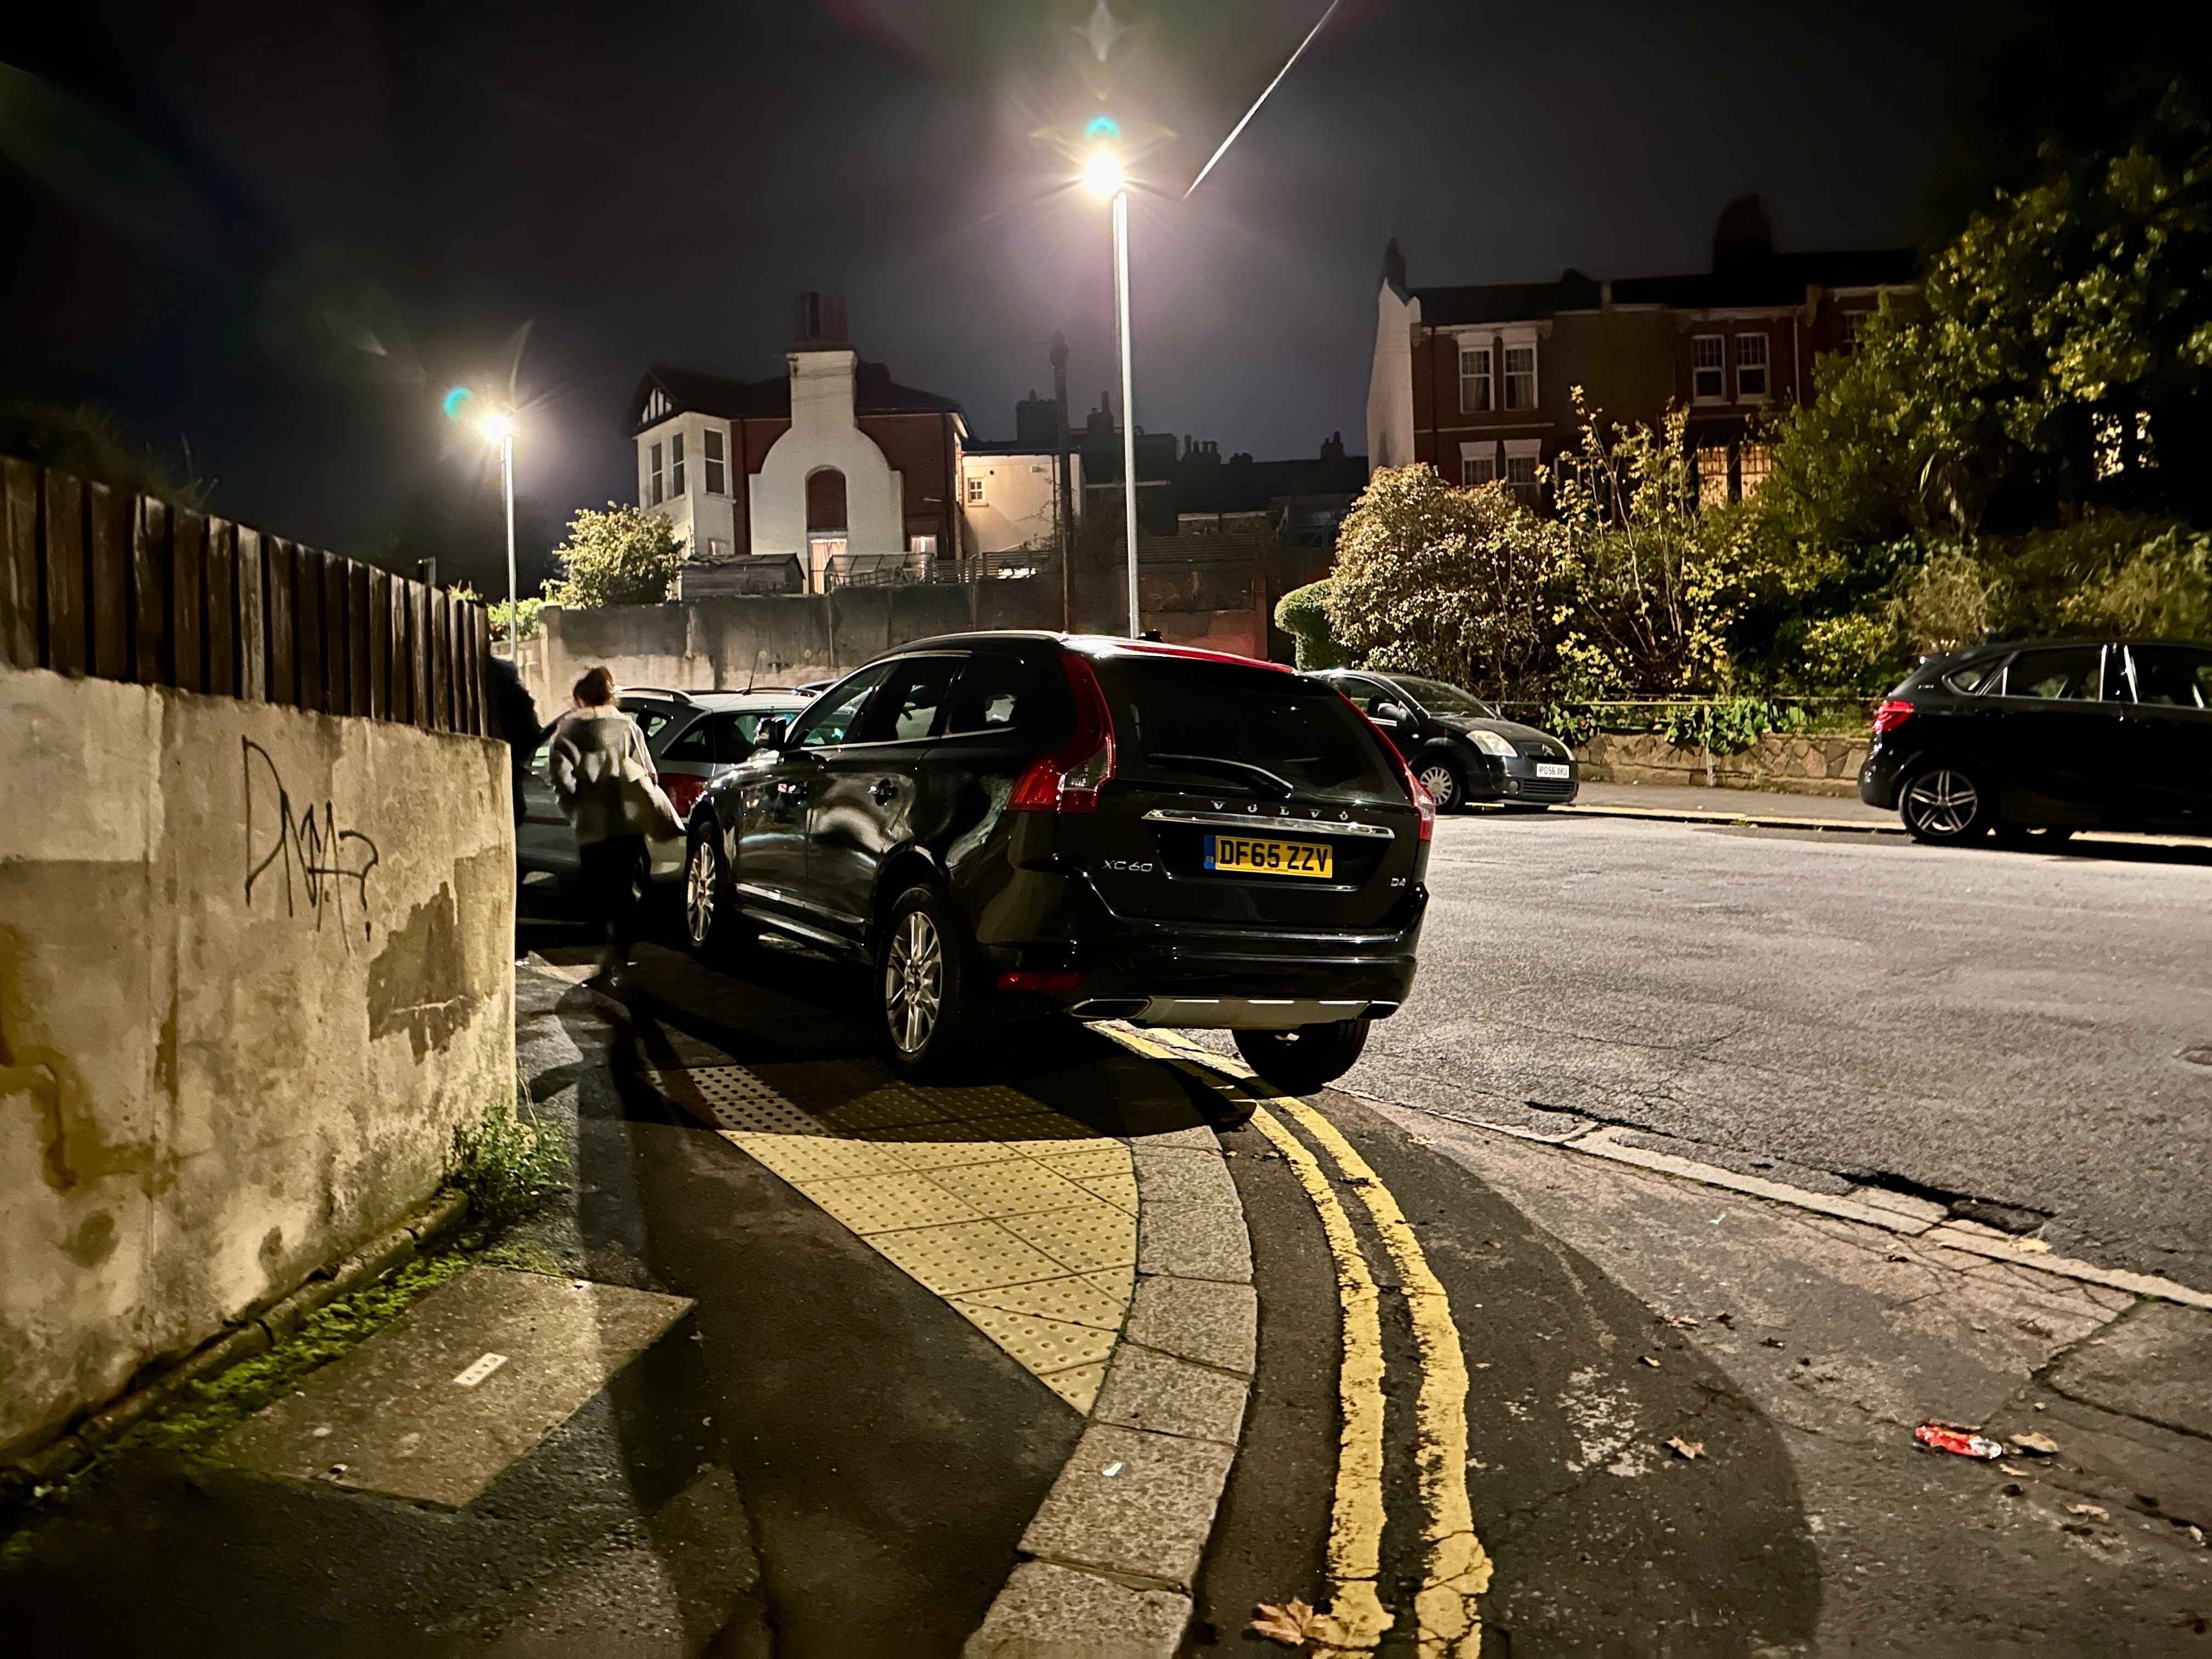 Photograph of DF65 ZZV - a Black Volvo XC60 parked in Hollingdean by a non-resident. The first of eight photographs supplied by the residents of Hollingdean.